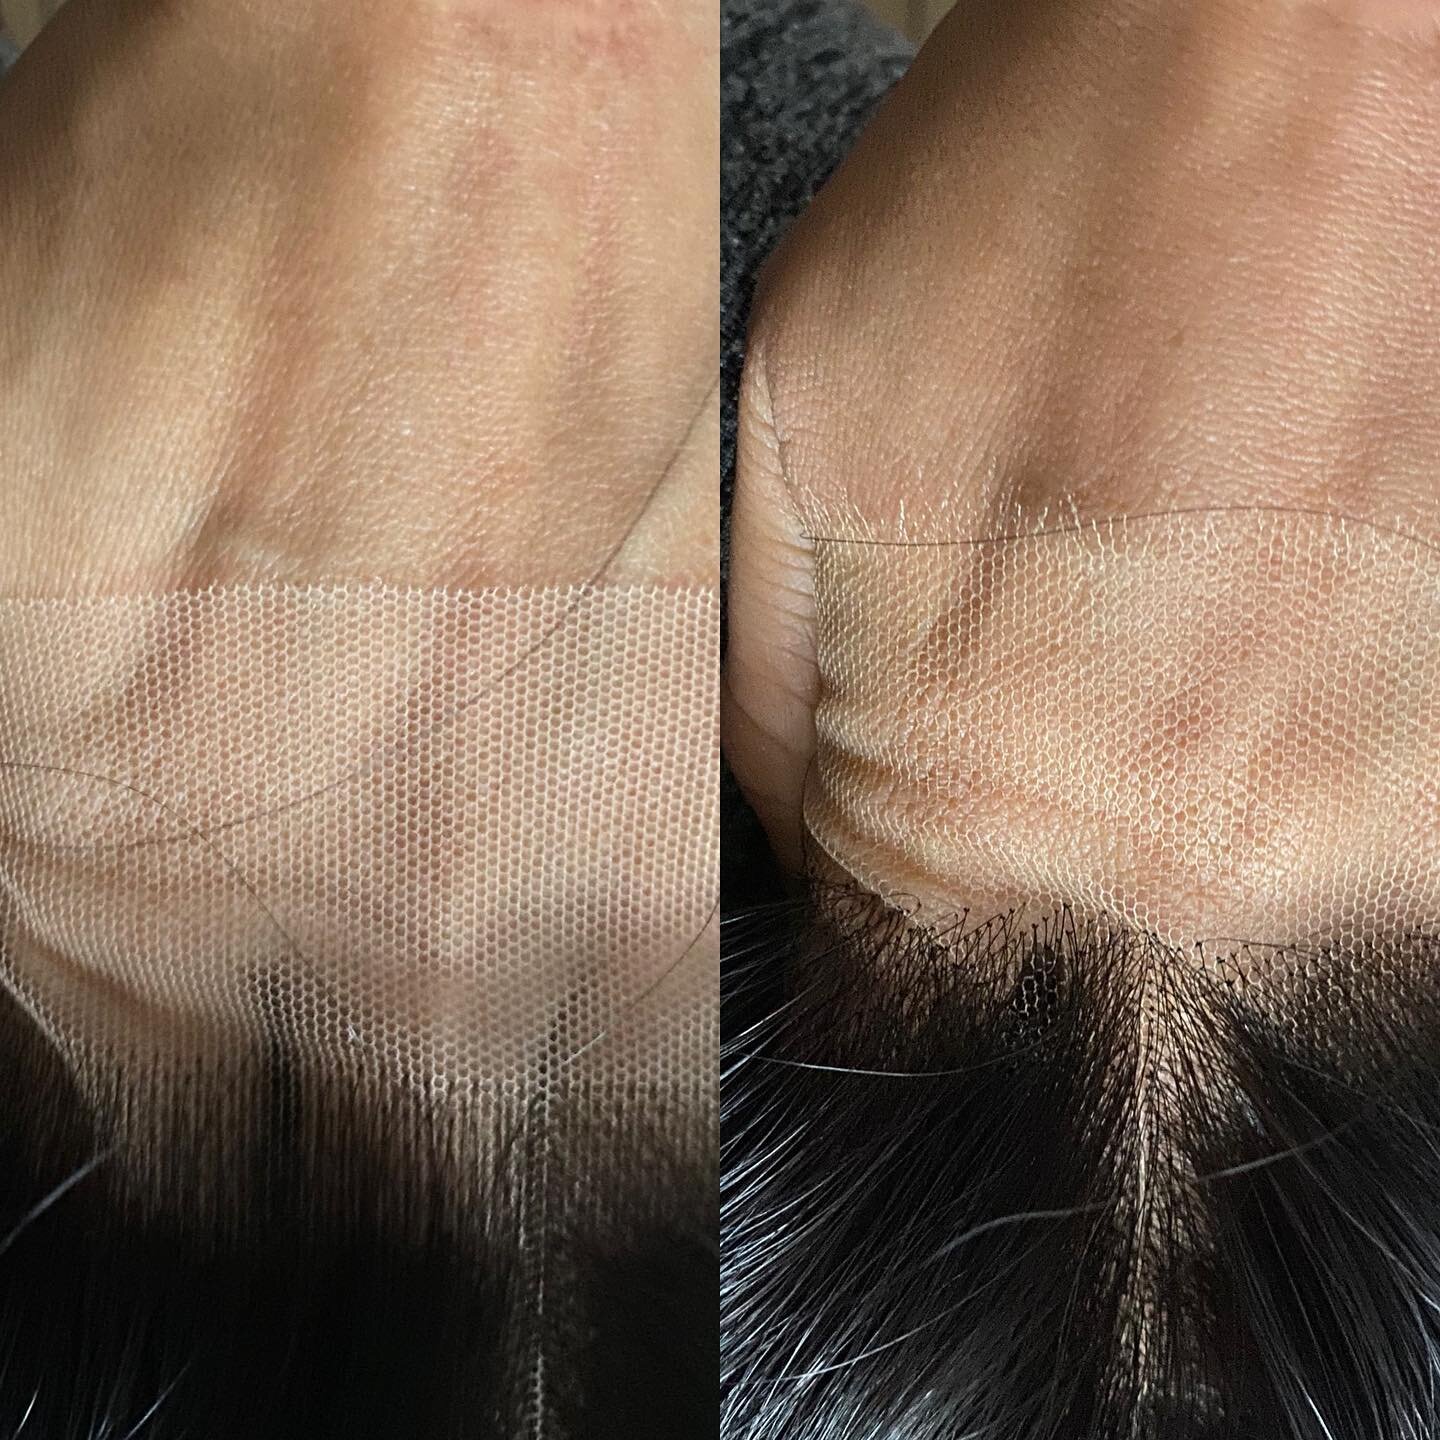 Here at LovingMy Hair we supply two lace types which are ; 

~ Raw HD - thinnest lace on the market, available in transparent lace 
~ Raw Swiss lace - thicker than HD but still relatively thin and blends well. Our Swiss lace is available in transpare